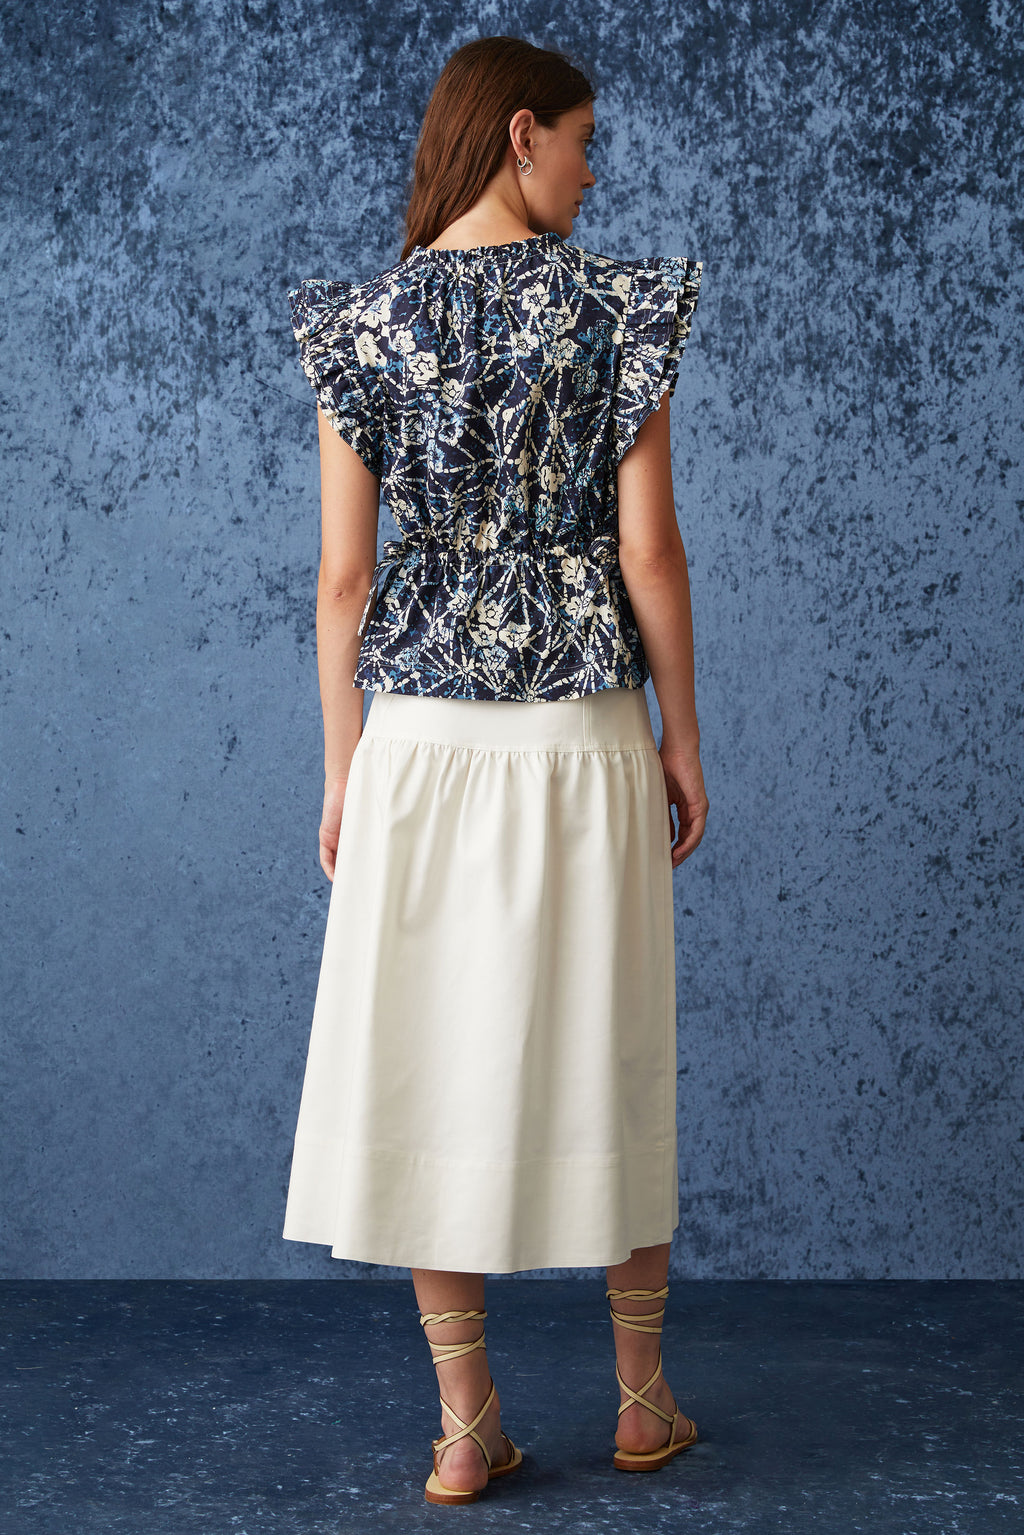 Solid white skirt with optional tie belt at the waist and straight silhouette